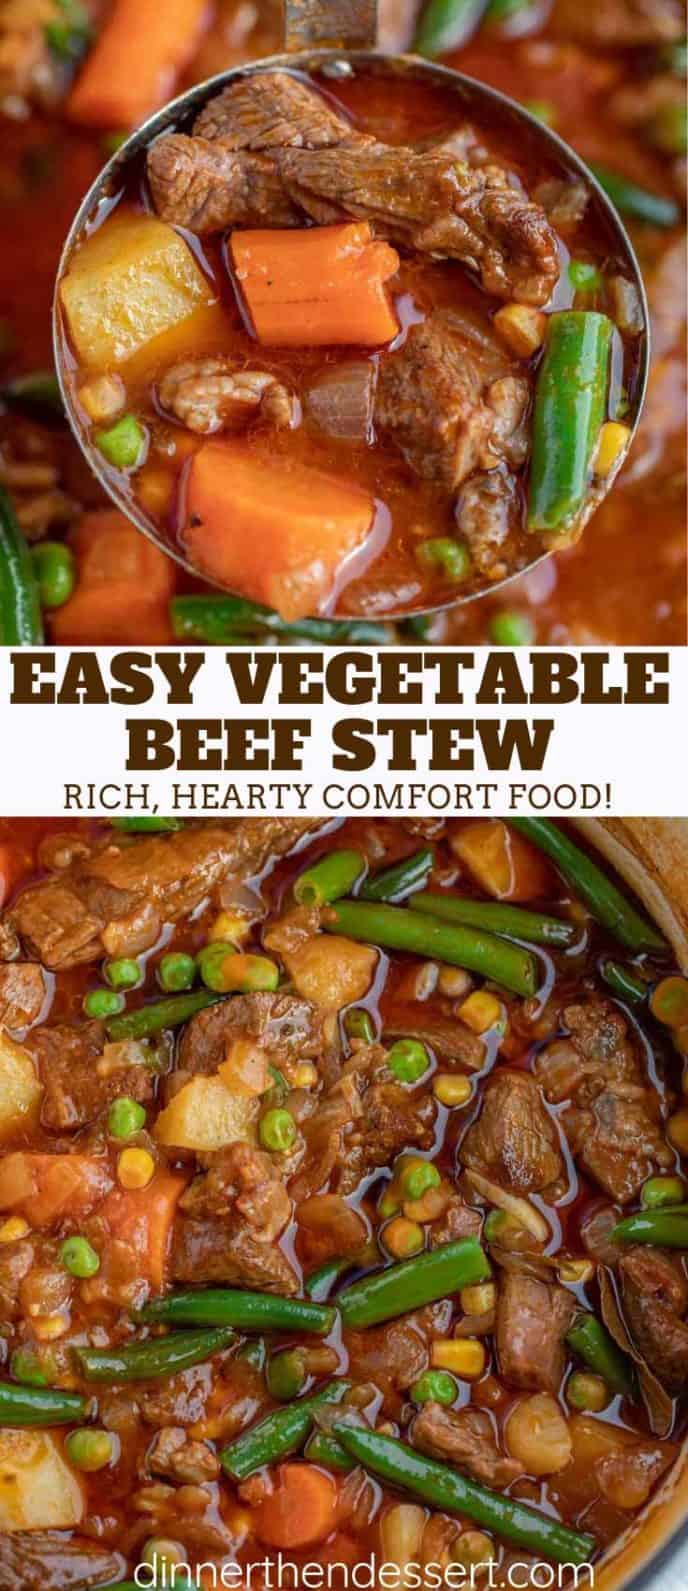 Rich Vegetable and Beef Stew